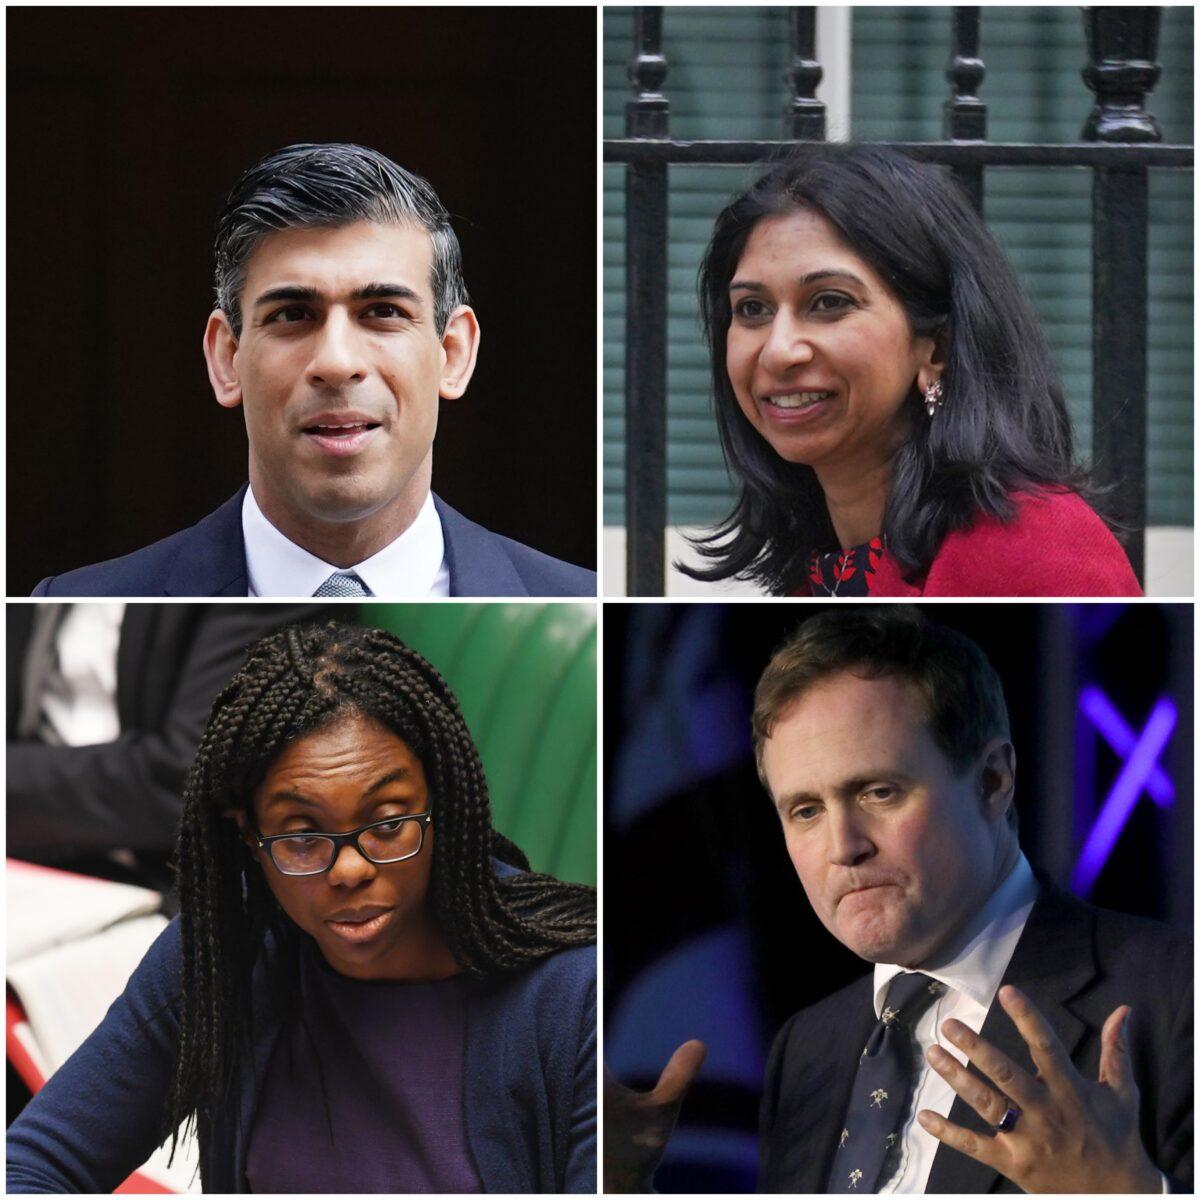 (Clockwise from top L) Conservative Party leader candidates Rishi Sunak, Suella Braverman, Tom Tugendhat, and Kemi Badenoch in undated photos. (Aaron Chown/Victoria Jones/UK Parliament/Jessica Taylor/Brian Lawless/PA Media)